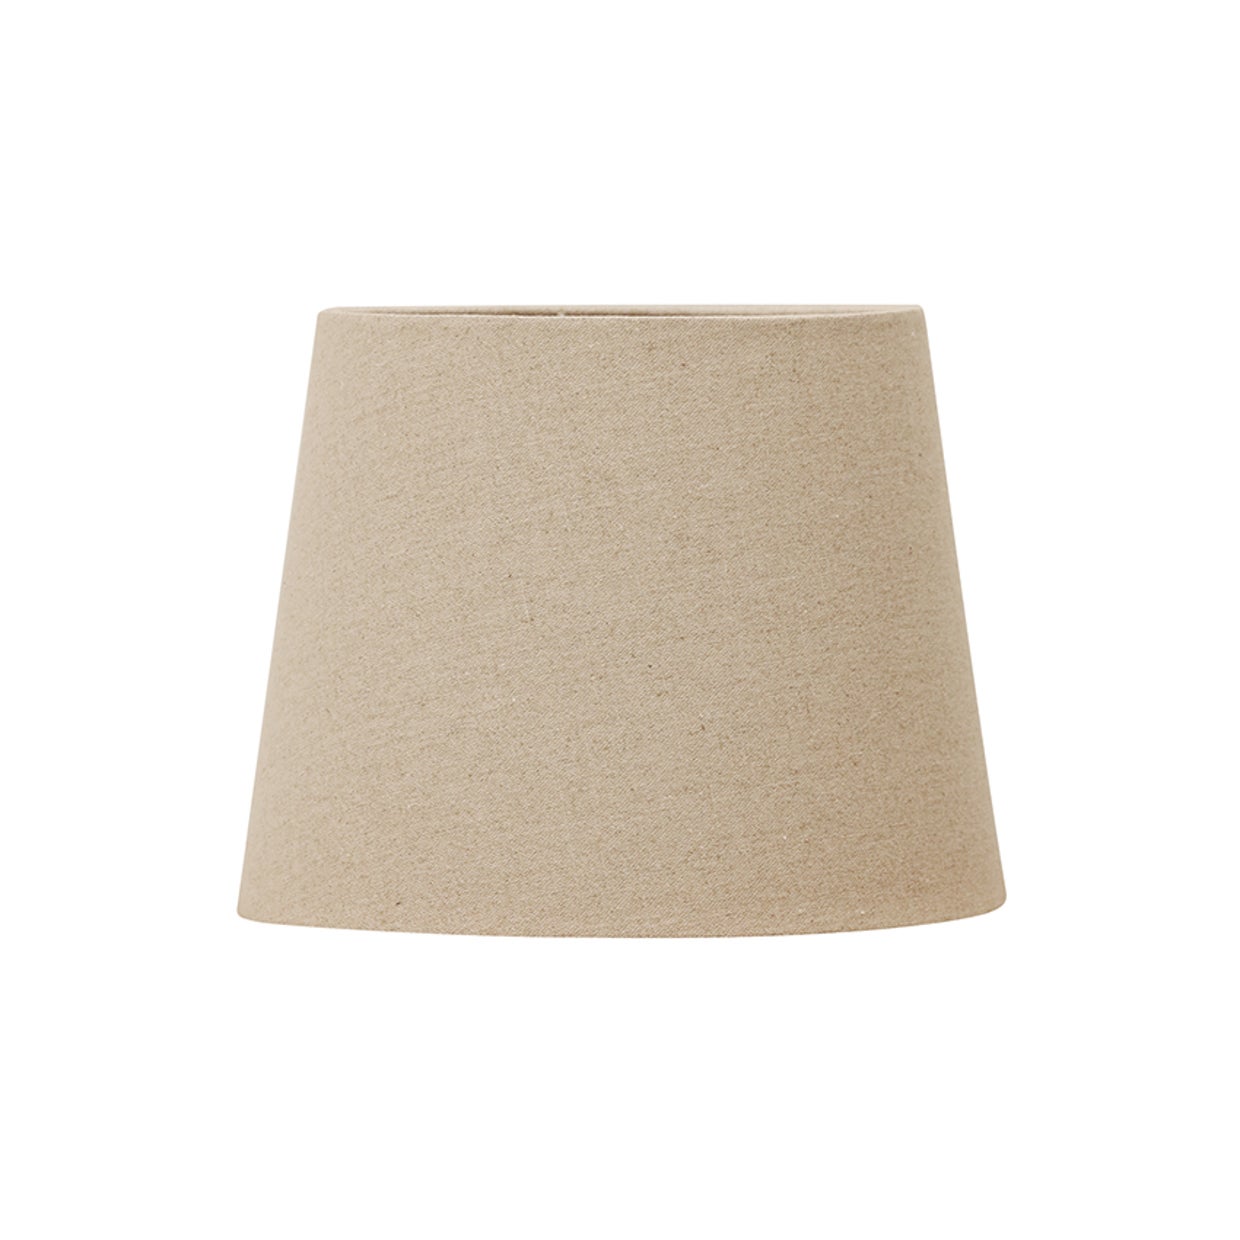 Raw Linen Tall Drum 36cm Lampshade